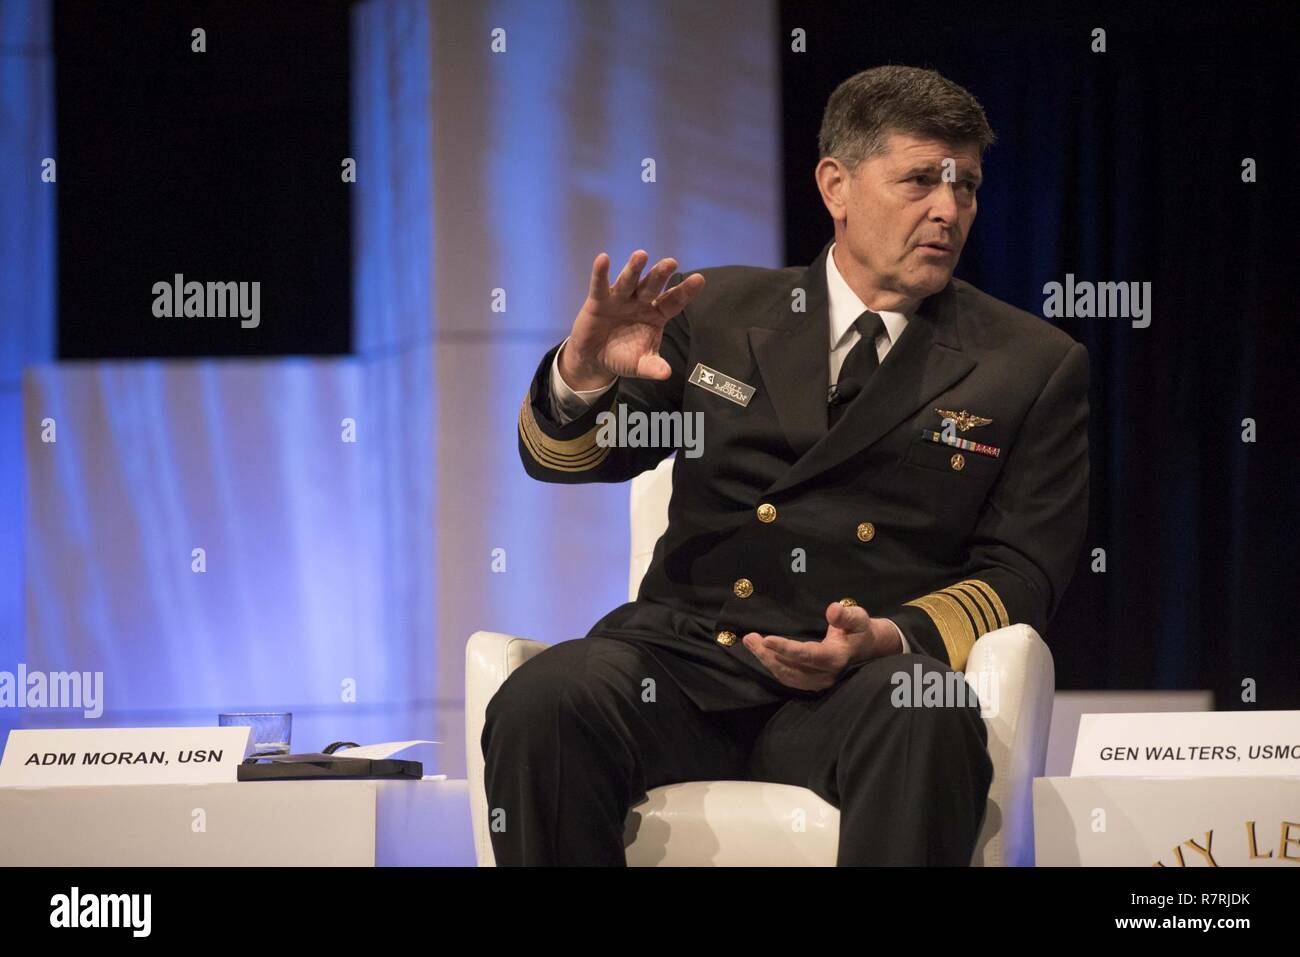 NATIONAL HARBOR, Md. (April 3, 2017) Vice Chief of Naval Operations (VCNO) Adm. Bill Moran participates in a panel for the Joint Service 'Sea Services Update' panel during the Sea-Air-Space Exposition. The Navy League’s Sea-Air-Space Exposition was founded in 1965 as a means to bring the U.S. defense industrial base, U.S. private-sector companies and key military decision makers together for an annual innovative, educational, professional and maritime-based event. Sea-Air-Space is the largest maritime exposition in the U.S. and continues as an invaluable extension of the Navy League’s mission  Stock Photo